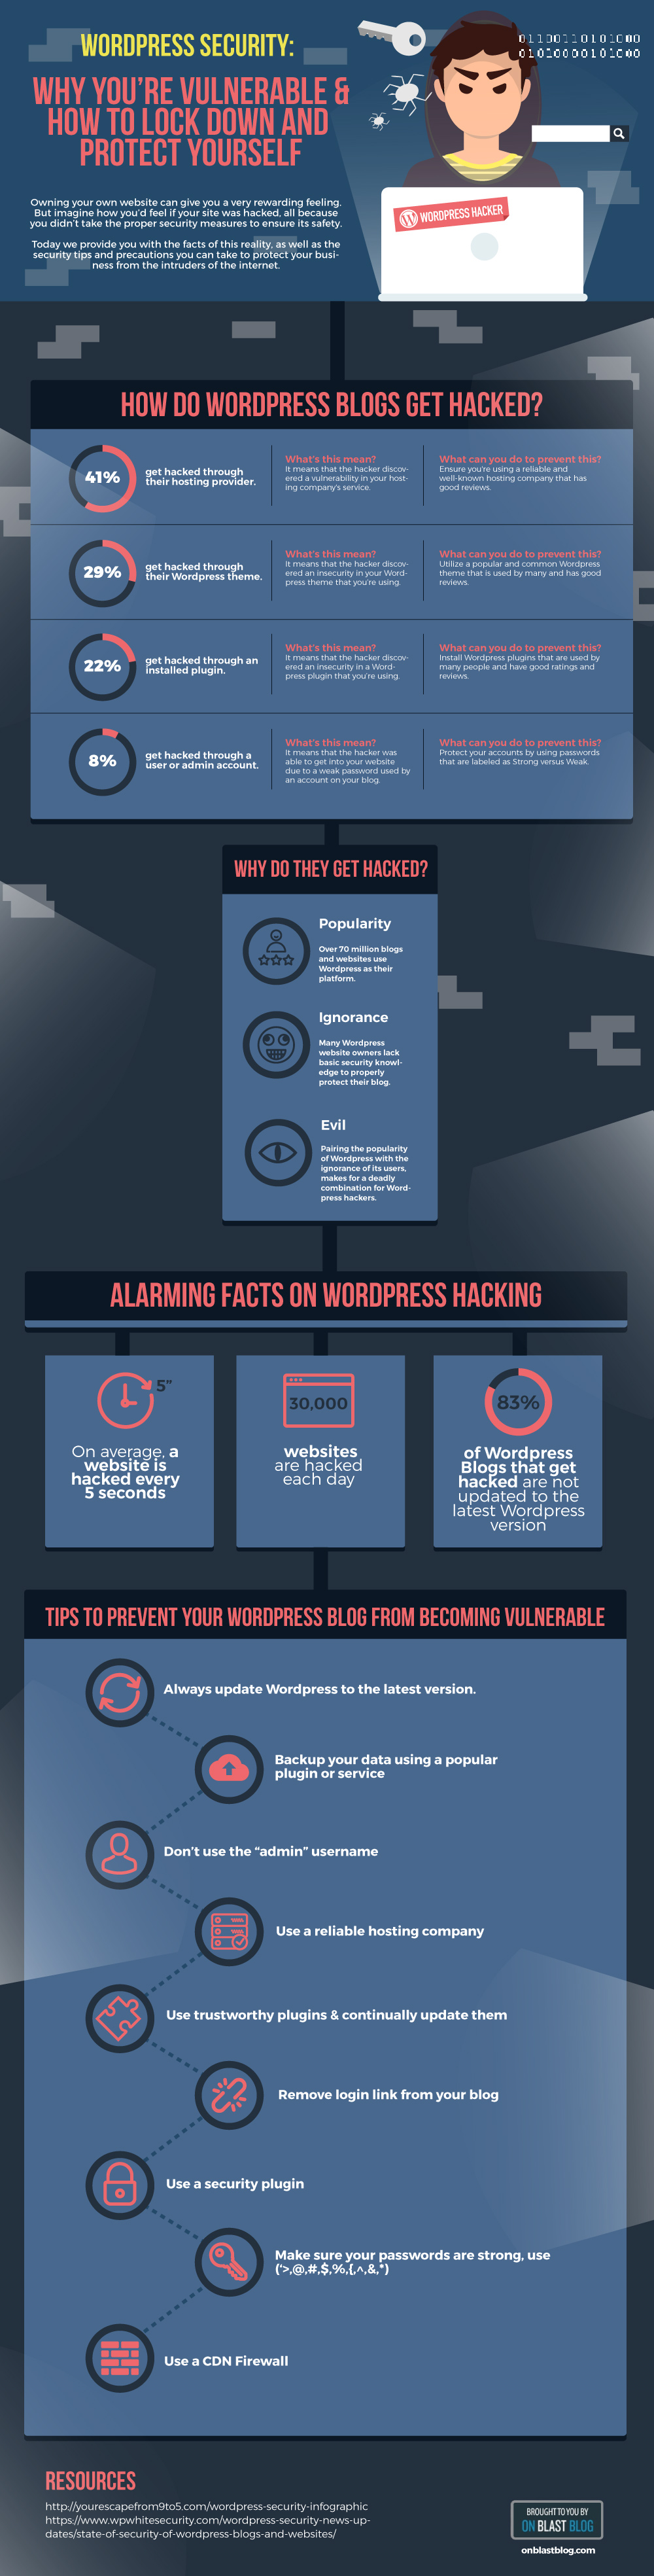 WordPress Security — The Beginner’s Guide [Infographic]